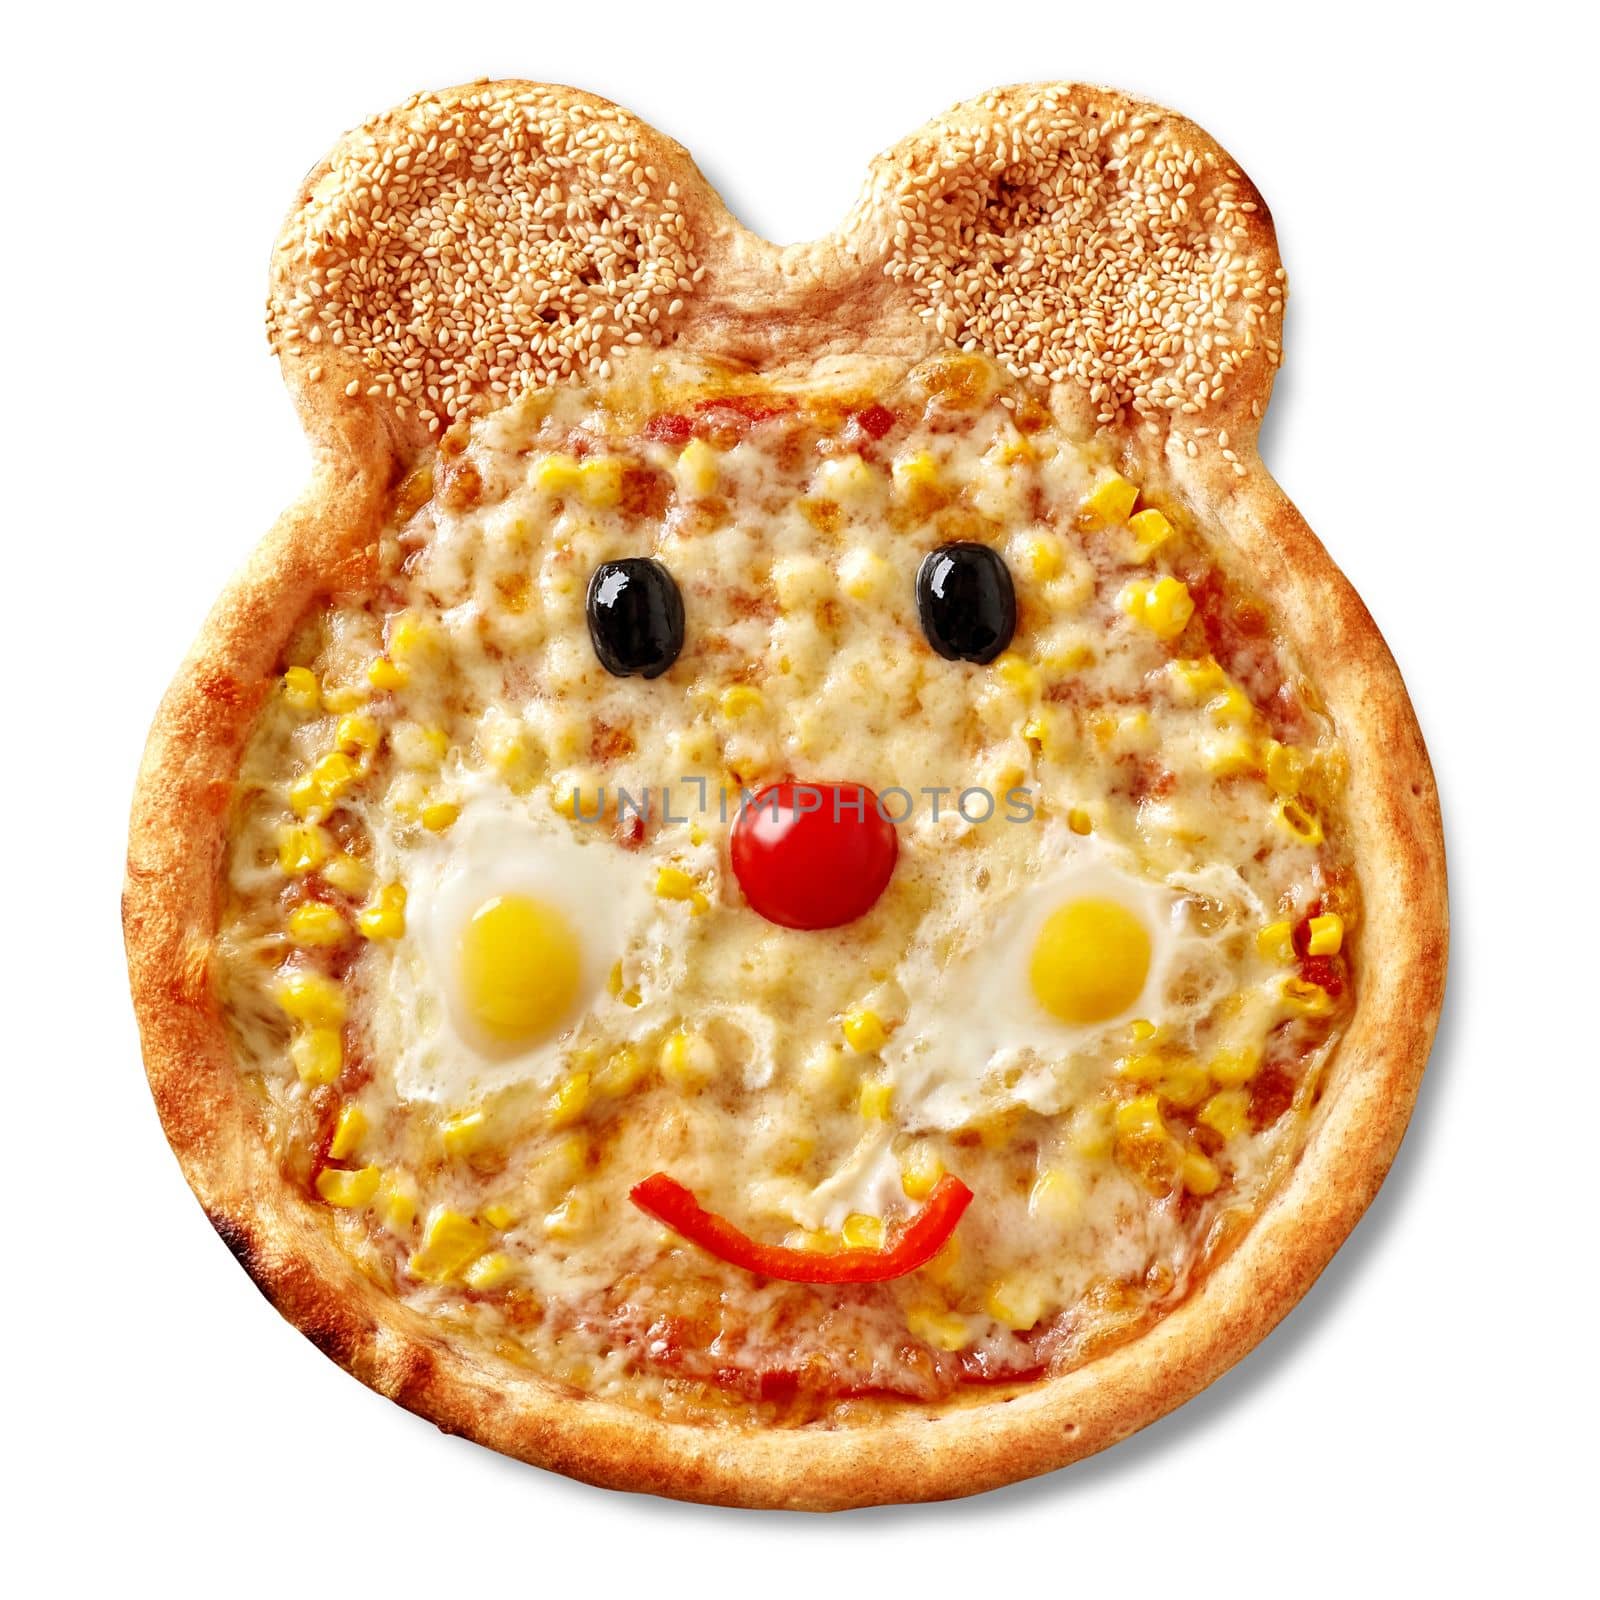 Funny pizza in form of smiling muzzle of bear with pelati sauce, melted mozzarella, corn, cherry tomato, bell pepper, olives, quail eggs and sesame sprinkled ears. Healthy delicious kids menu